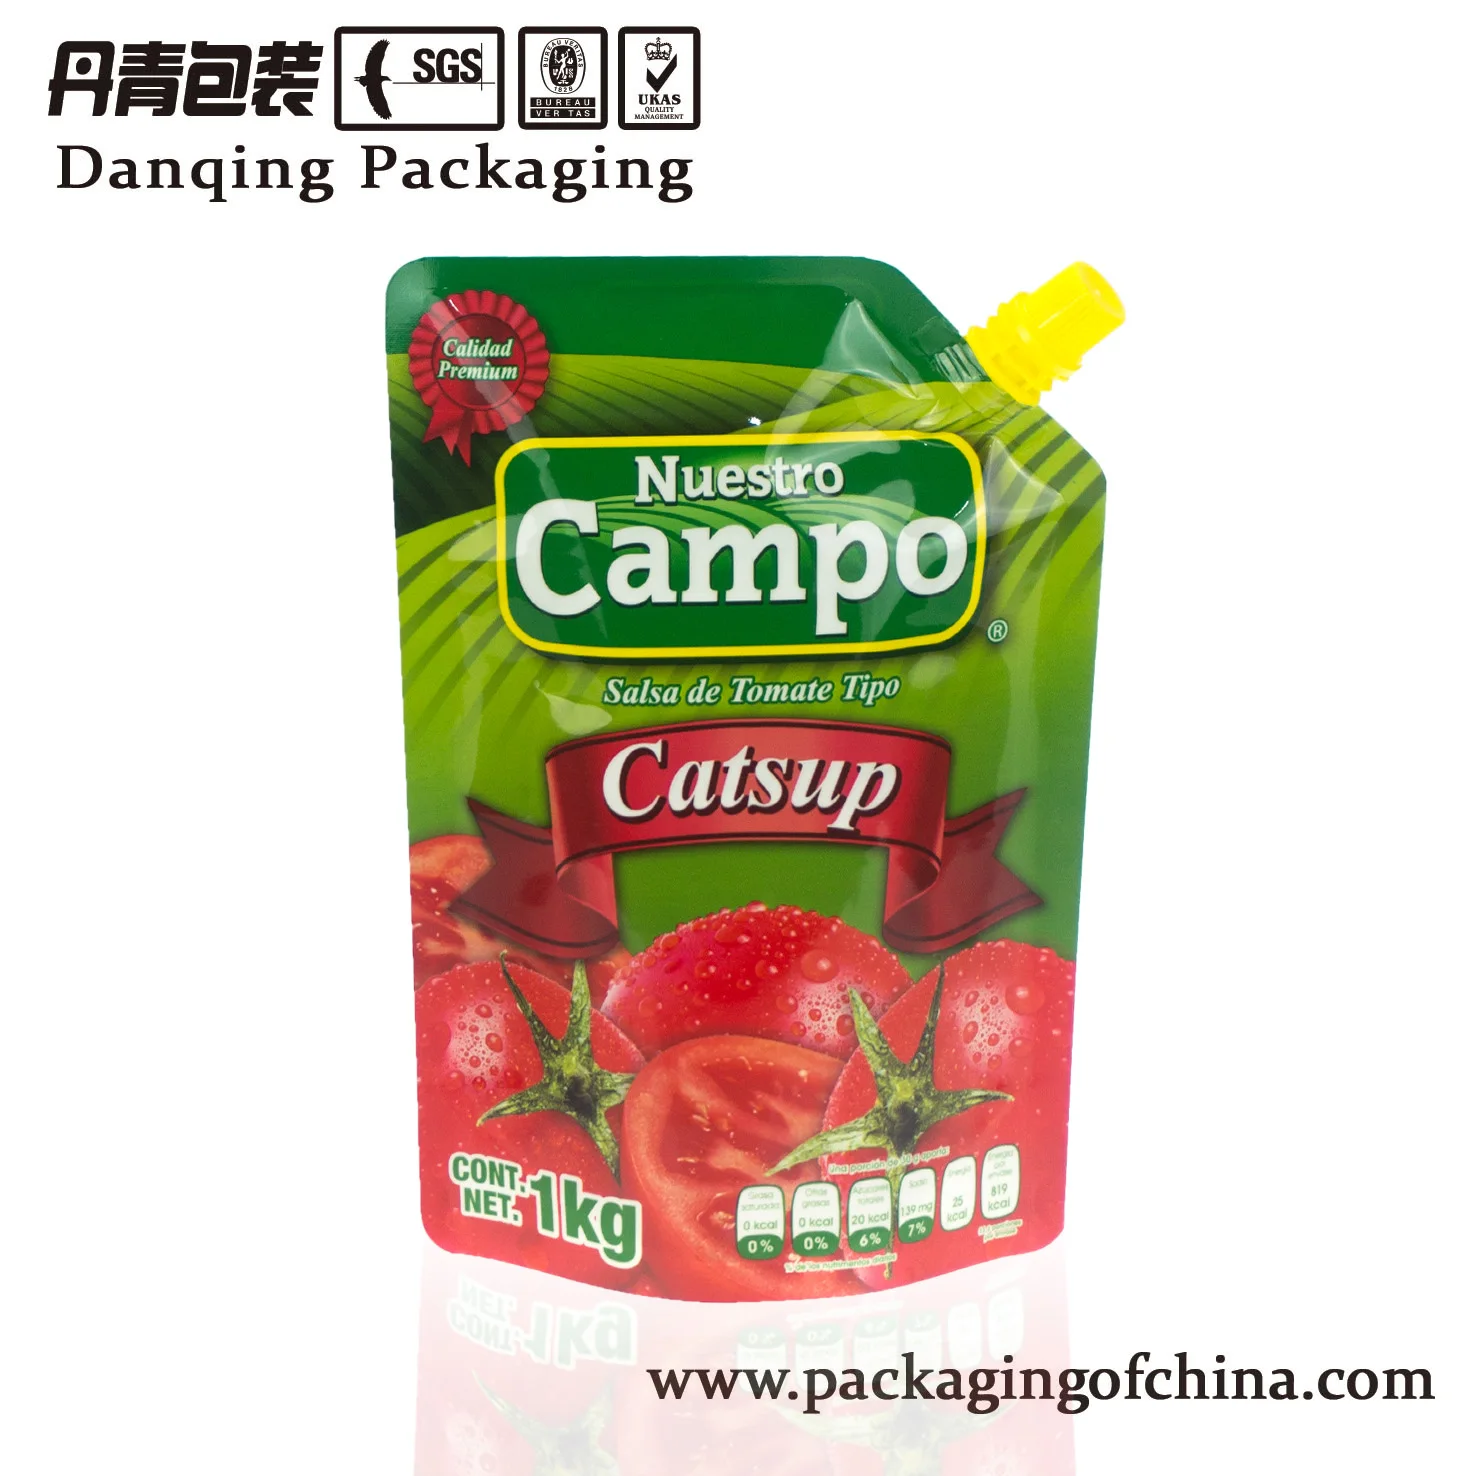 China DQ PACK special flexible packaging doypack with spout for ketchup ,chilli ,mayo sauce